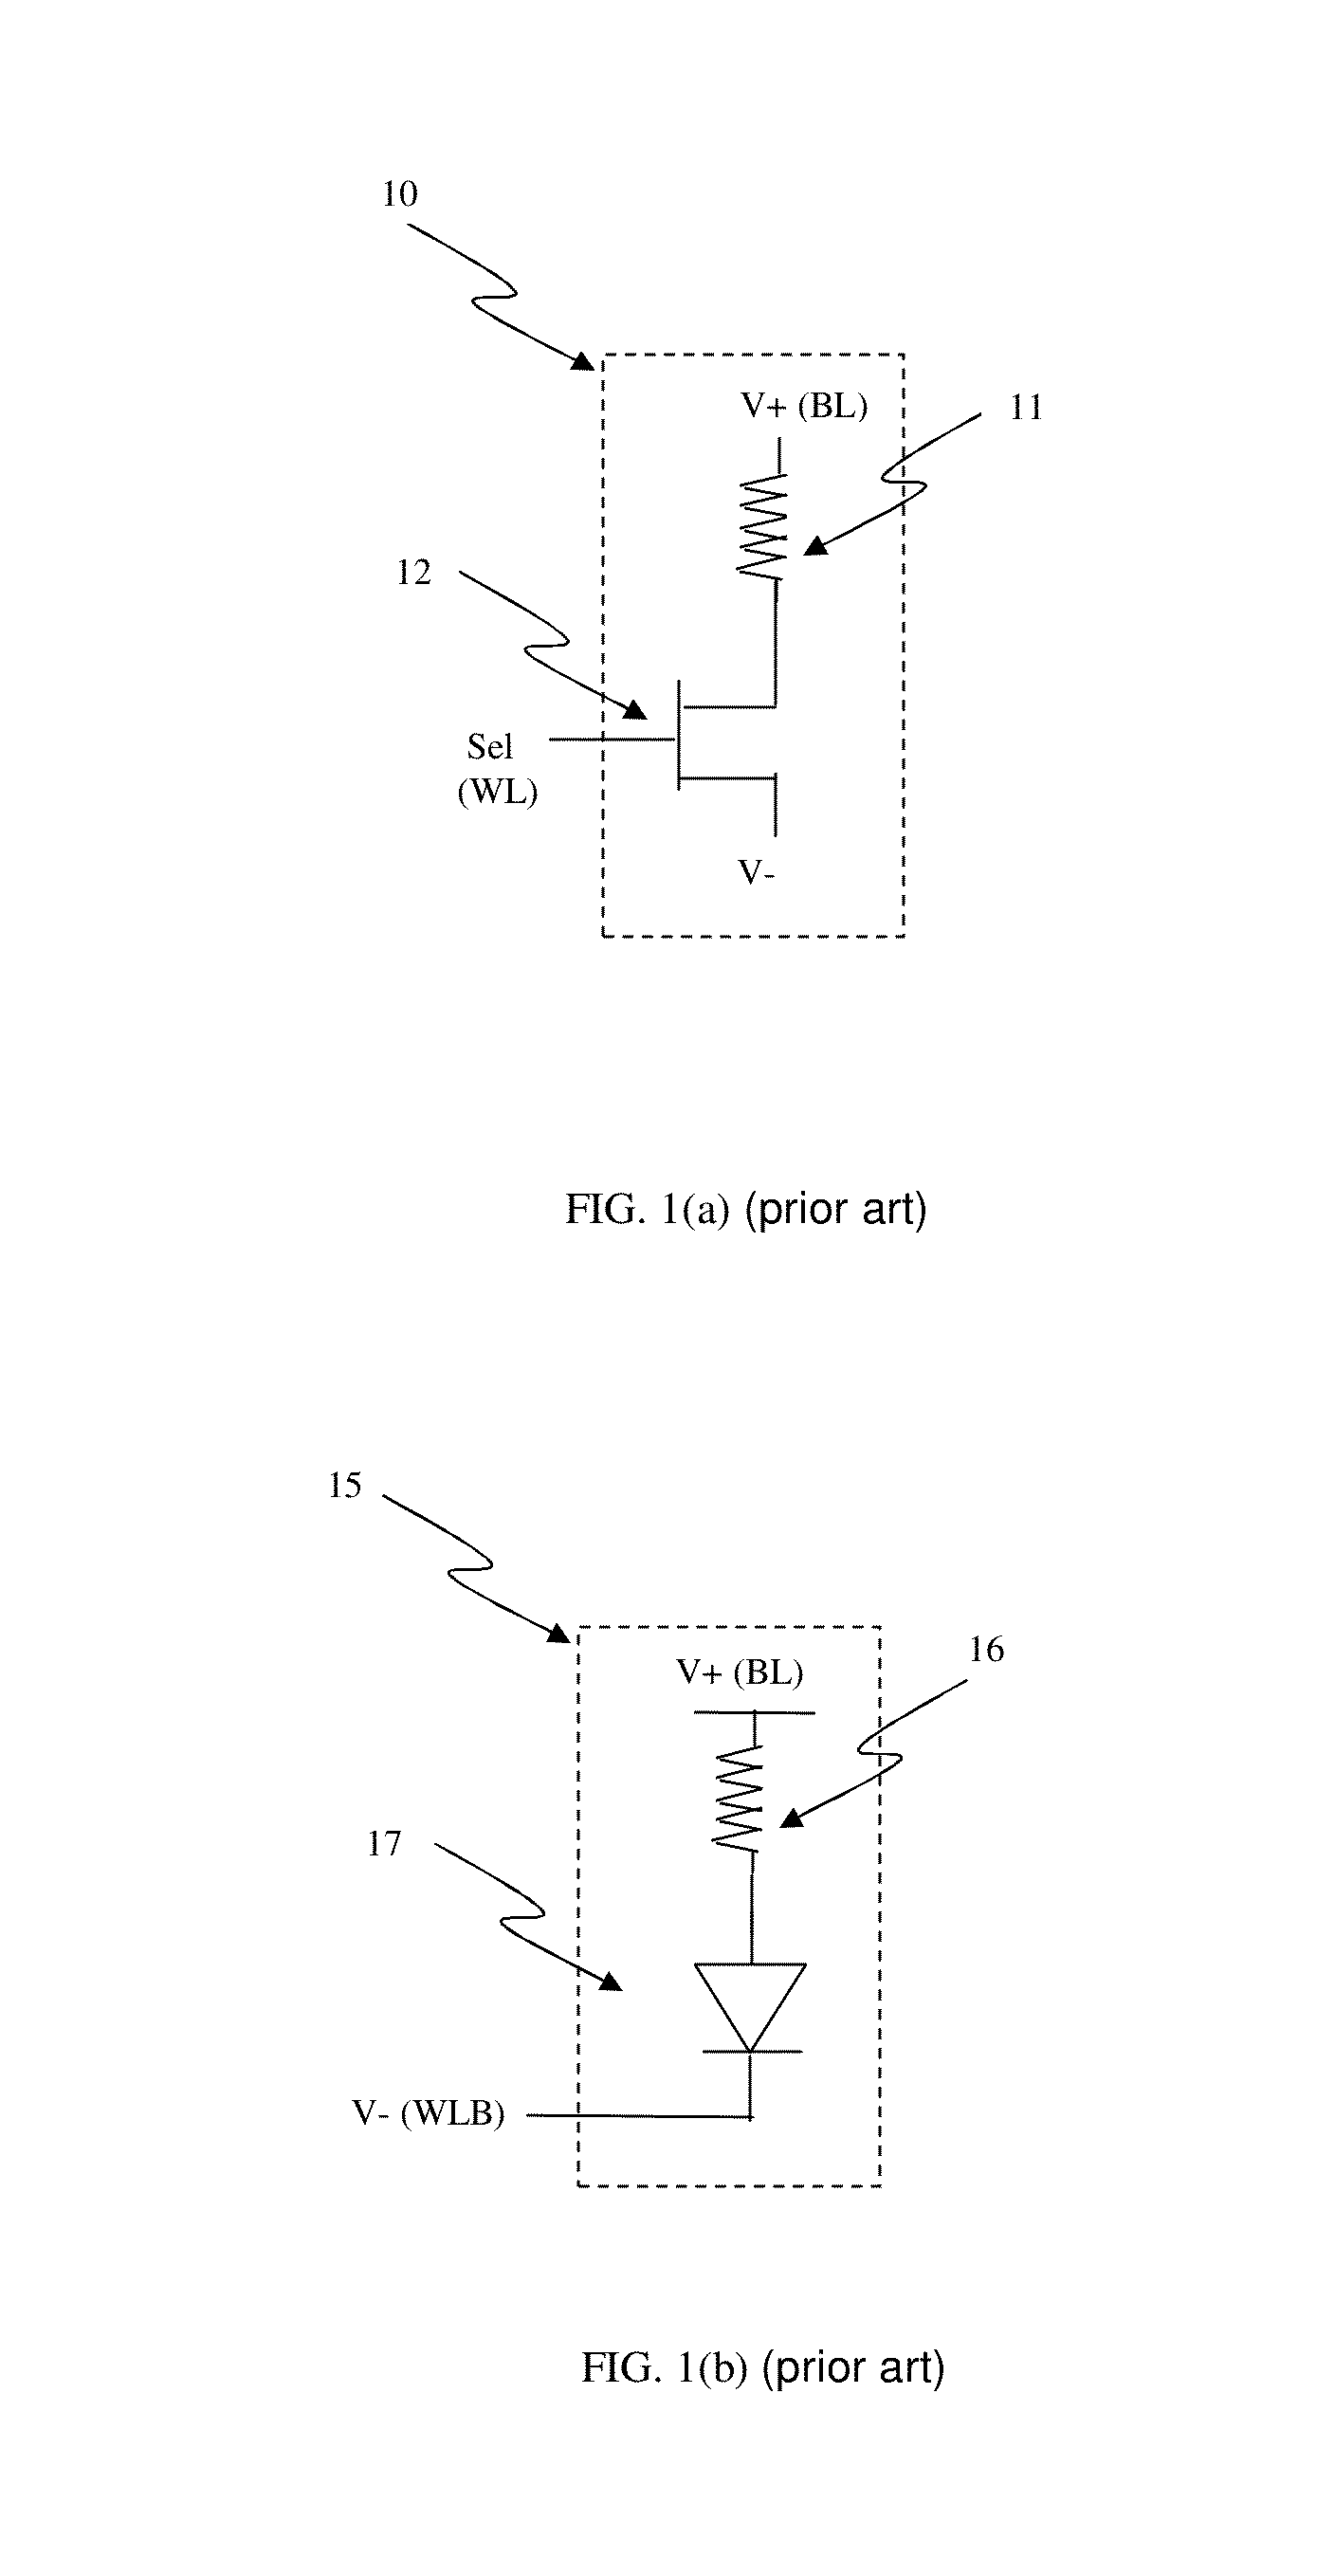 Circuit and system for testing a one-time programmable (OTP) memory